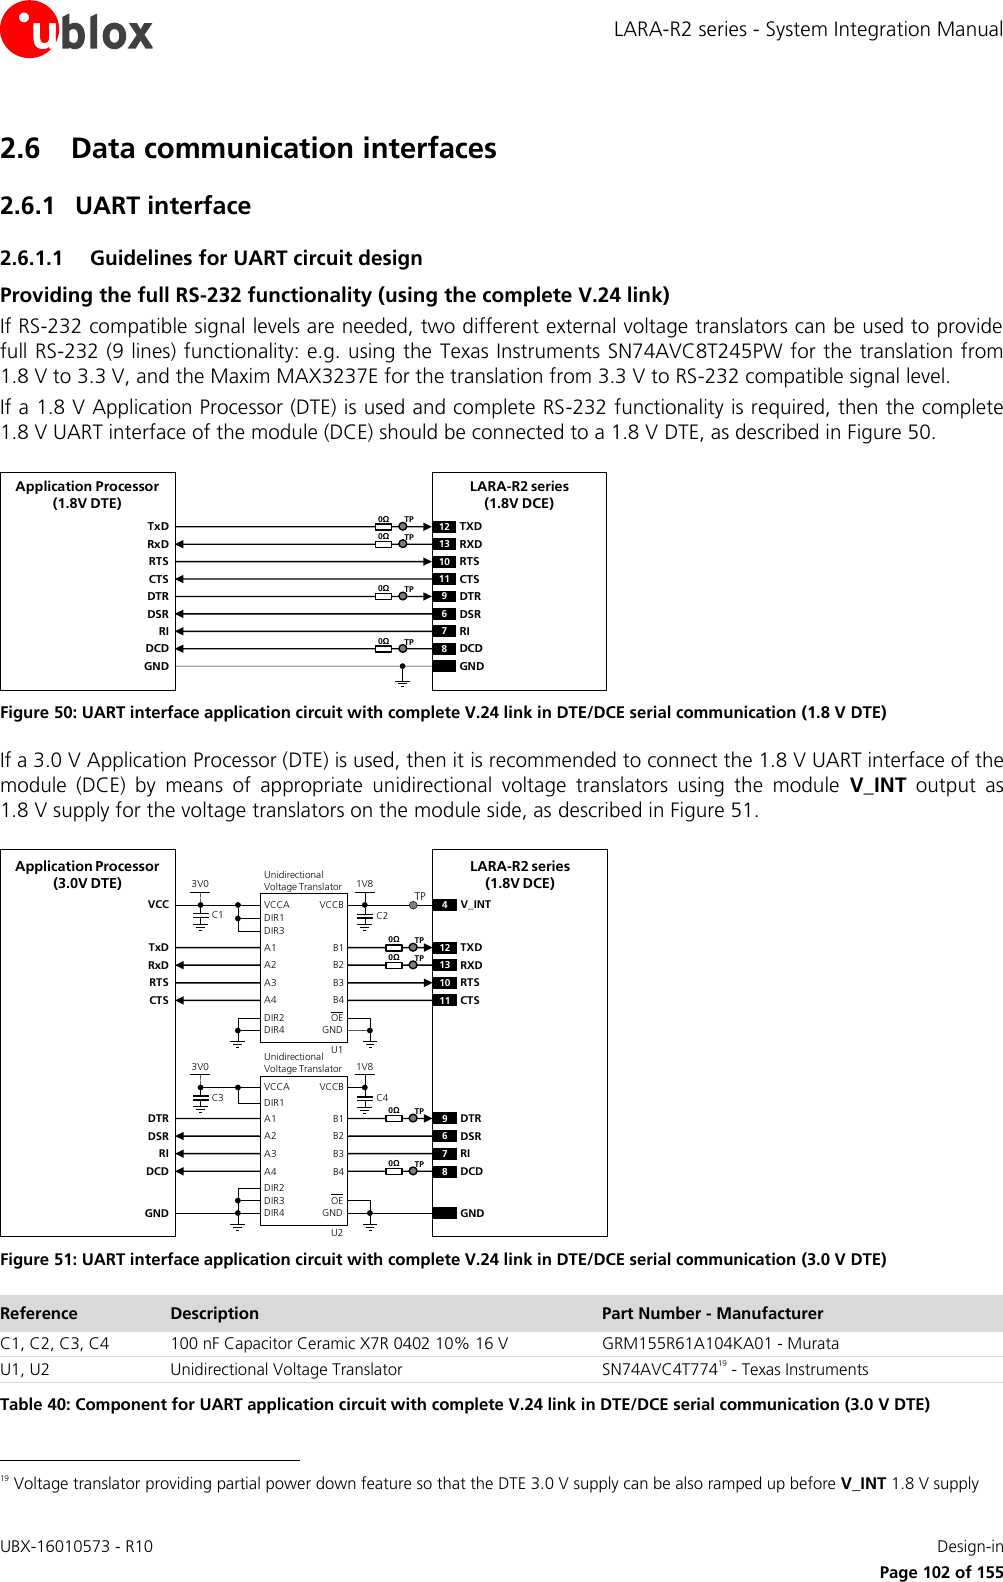 LARA-R2 series - System Integration Manual UBX-16010573 - R10    Design-in     Page 102 of 155 2.6 Data communication interfaces 2.6.1 UART interface  2.6.1.1 Guidelines for UART circuit design Providing the full RS-232 functionality (using the complete V.24 link) If RS-232 compatible signal levels are needed, two different external voltage translators can be used to provide full RS-232 (9 lines) functionality: e.g. using the  Texas Instruments SN74AVC8T245PW for the translation from 1.8 V to 3.3 V, and the Maxim MAX3237E for the translation from 3.3 V to RS-232 compatible signal level. If a 1.8 V Application Processor (DTE) is used and complete RS-232 functionality is required, then the complete 1.8 V UART interface of the module (DCE) should be connected to a 1.8 V DTE, as described in Figure 50. TxDApplication Processor(1.8V DTE)RxDRTSCTSDTRDSRRIDCDGNDLARA-R2 series(1.8V DCE)12 TXD9DTR13 RXD10 RTS11 CTS6DSR7RI8DCDGND0ΩTP0ΩTP0ΩTP0ΩTP Figure 50: UART interface application circuit with complete V.24 link in DTE/DCE serial communication (1.8 V DTE) If a 3.0 V Application Processor (DTE) is used, then it is recommended to connect the 1.8 V UART interface of the module  (DCE)  by  means  of  appropriate  unidirectional  voltage  translators  using  the  module  V_INT  output  as 1.8 V supply for the voltage translators on the module side, as described in Figure 51. 4V_INTTxDApplication Processor(3.0V DTE)RxDRTSCTSDTRDSRRIDCDGNDLARA-R2 series(1.8V DCE)12 TXD9DTR13 RXD10 RTS11 CTS6DSR7RI8DCDGND1V8B1 A1GNDU1B3A3VCCBVCCAUnidirectionalVoltage TranslatorC1 C23V0DIR3DIR2 OEDIR1VCCB2 A2B4A4DIR41V8B1 A1GNDU2B3A3VCCBVCCAUnidirectionalVoltage TranslatorC3 C43V0DIR1DIR3 OEB2 A2B4A4DIR4DIR2TP0ΩTP0ΩTP0ΩTP0ΩTP Figure 51: UART interface application circuit with complete V.24 link in DTE/DCE serial communication (3.0 V DTE) Reference Description Part Number - Manufacturer C1, C2, C3, C4 100 nF Capacitor Ceramic X7R 0402 10% 16 V GRM155R61A104KA01 - Murata U1, U2 Unidirectional Voltage Translator SN74AVC4T77419 - Texas Instruments Table 40: Component for UART application circuit with complete V.24 link in DTE/DCE serial communication (3.0 V DTE)                                                       19 Voltage translator providing partial power down feature so that the DTE 3.0 V supply can be also ramped up before V_INT 1.8 V supply 